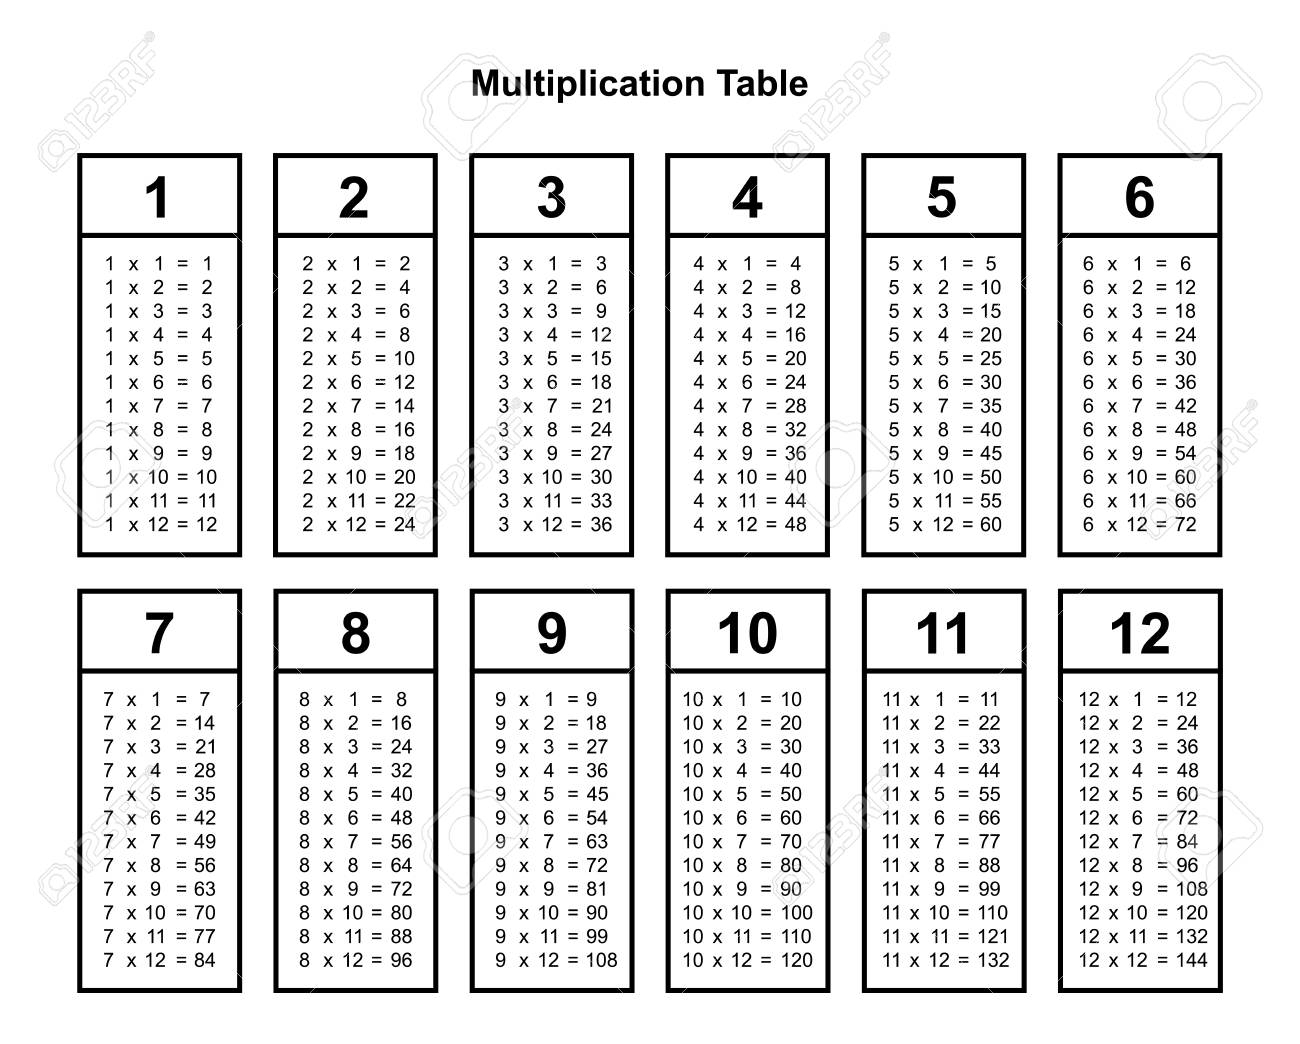 Multiplication Table Chart Or Multiplication Table Printable..